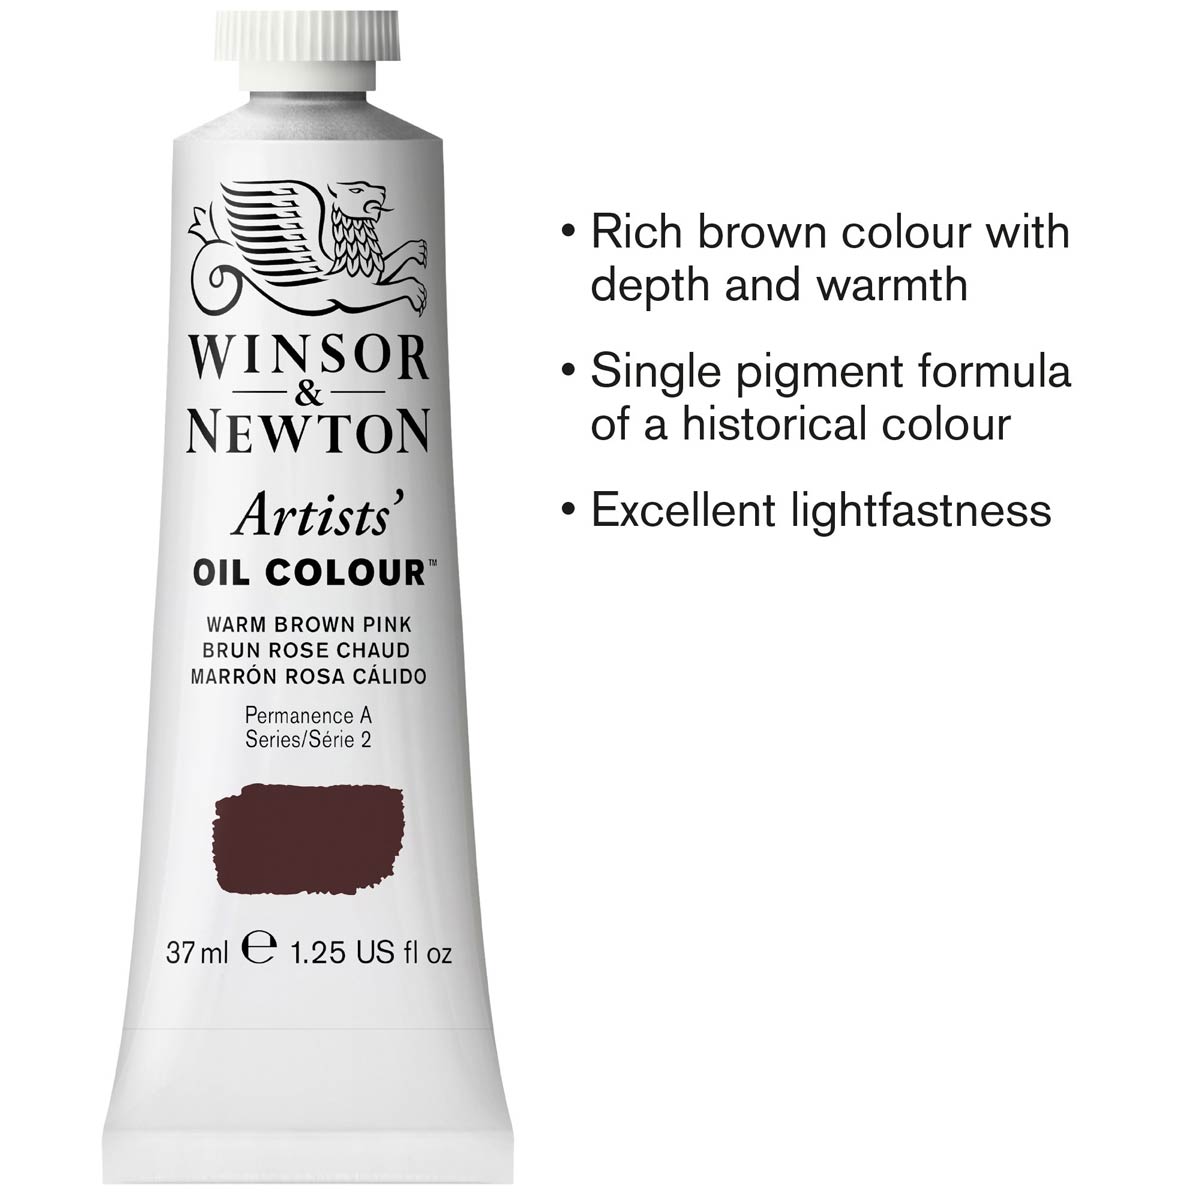 Winsor and Newton - Artists' Oil Colour - 37ml - Warm Brown Pink S2